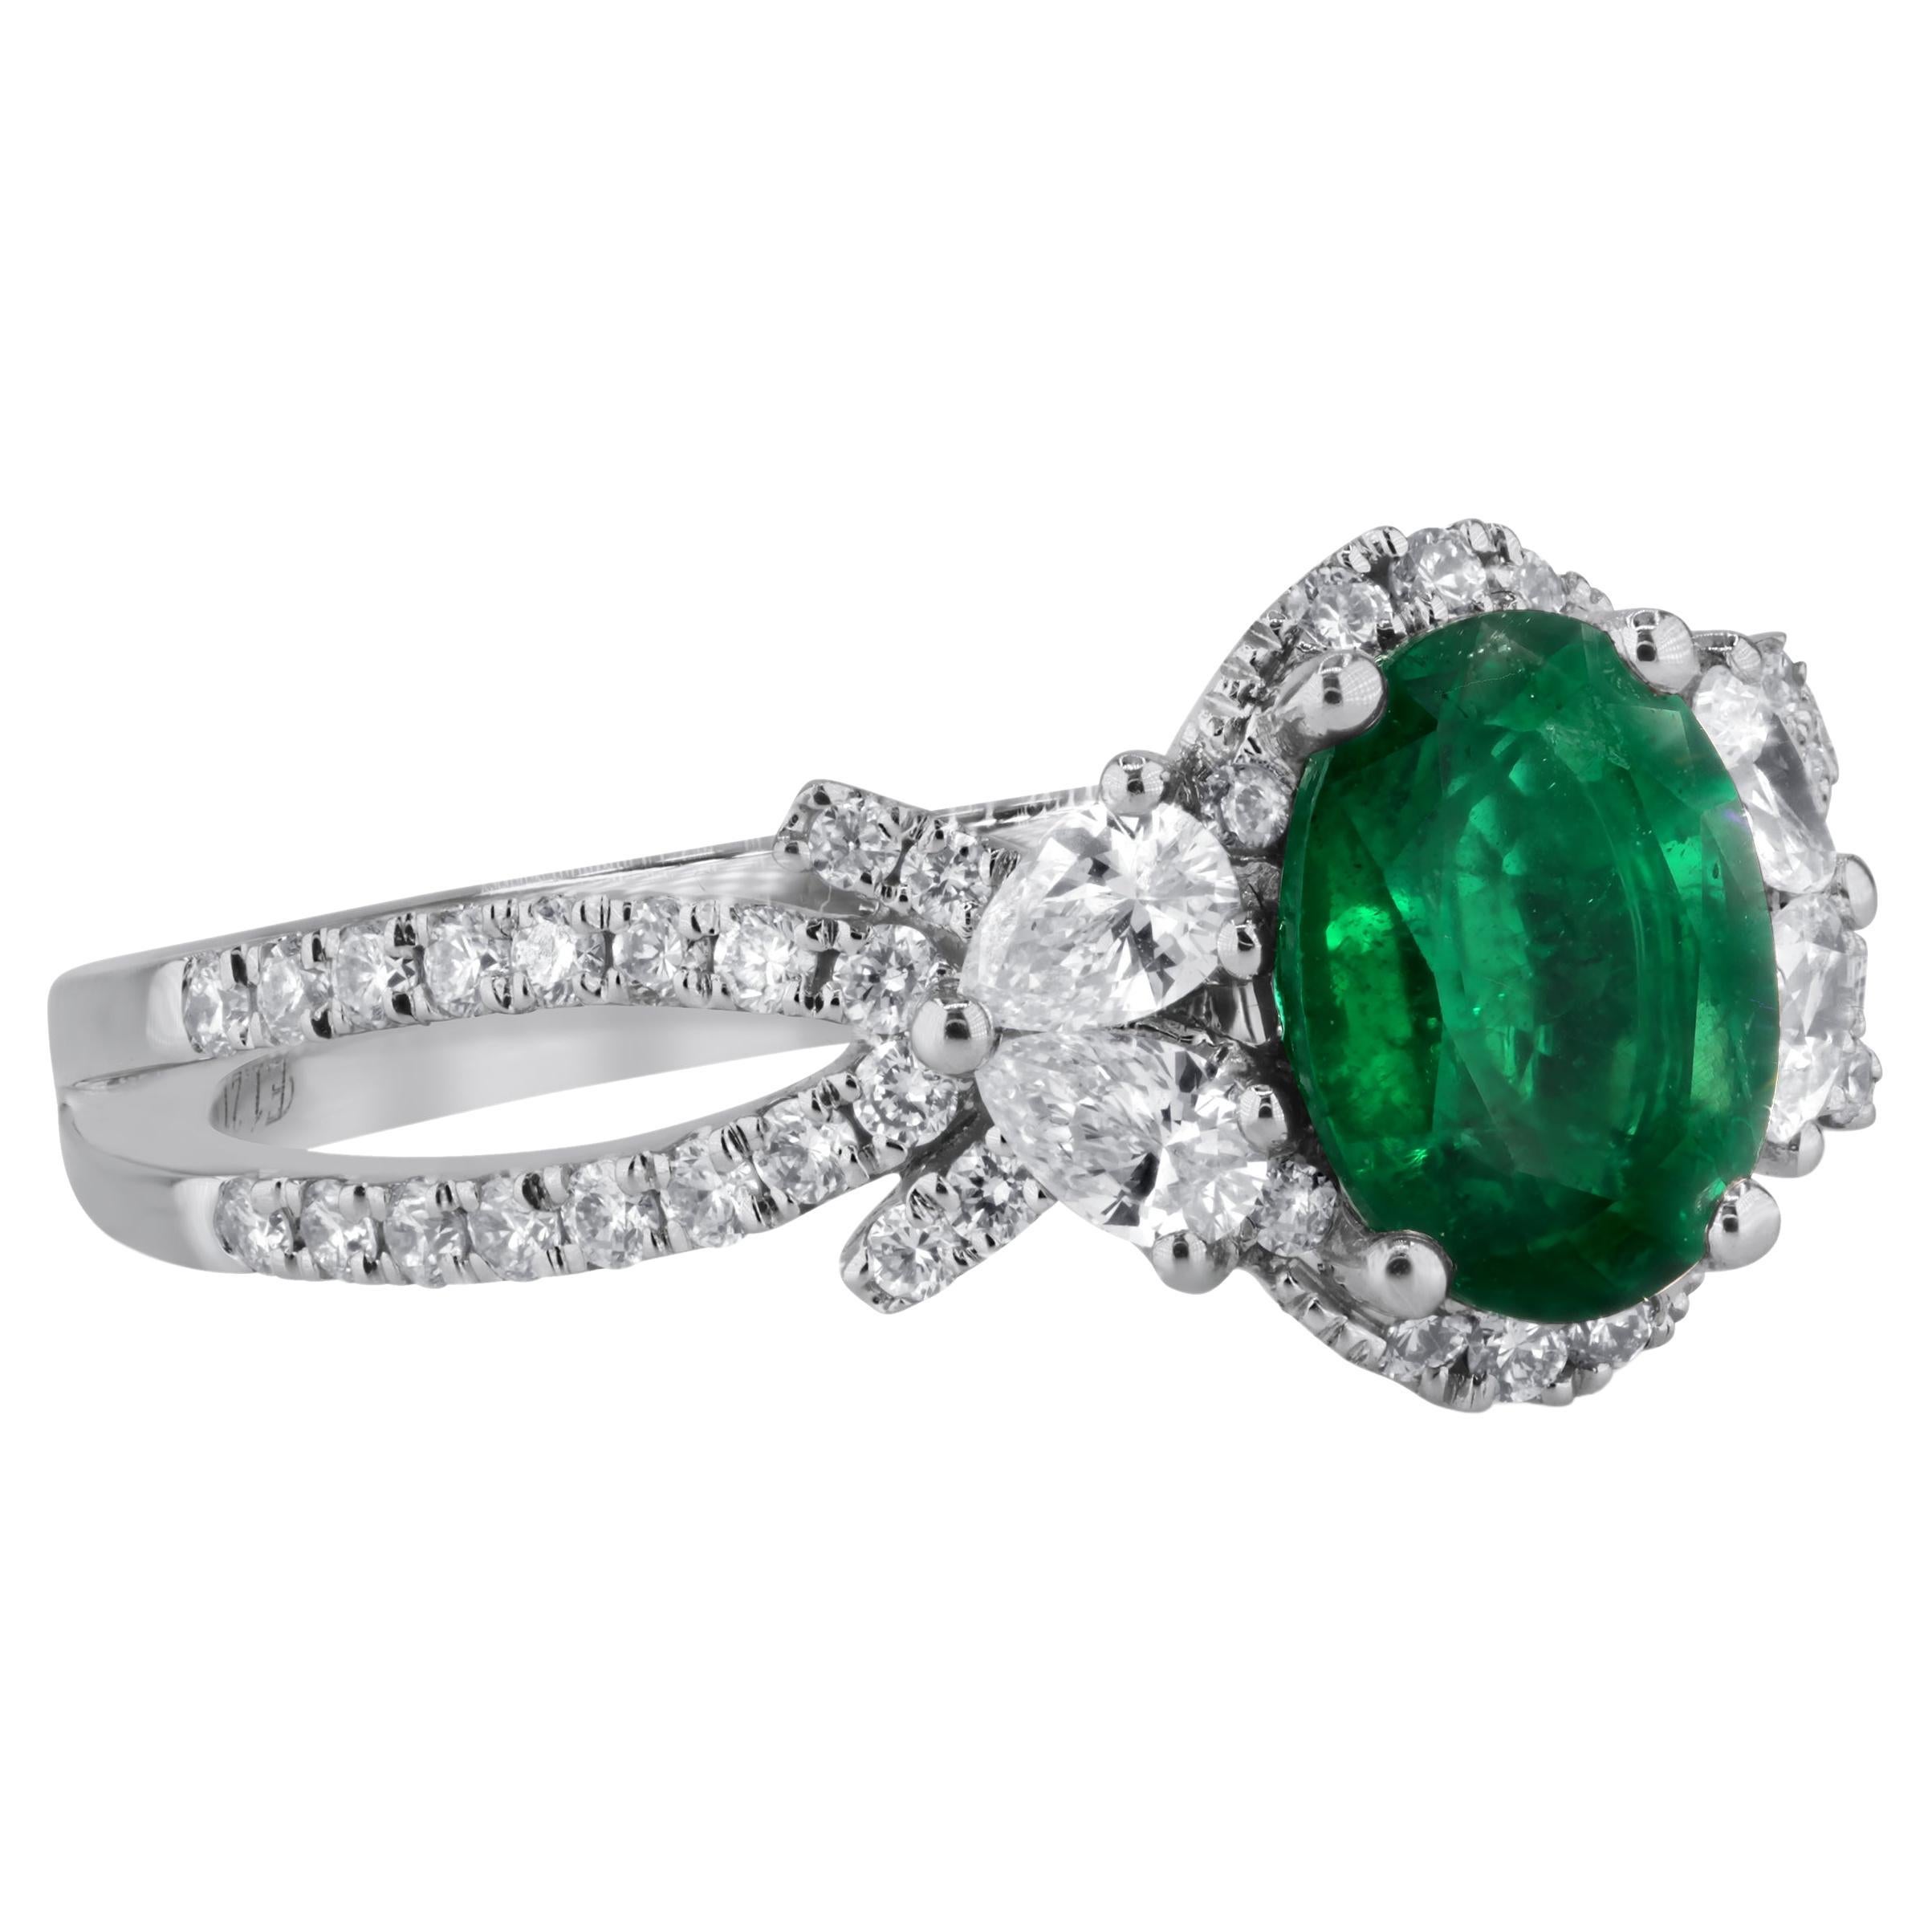 1.21 Carat Oval Cut Fine Emerald and 0.64 Carat Diamond Ring in 18k White Gold